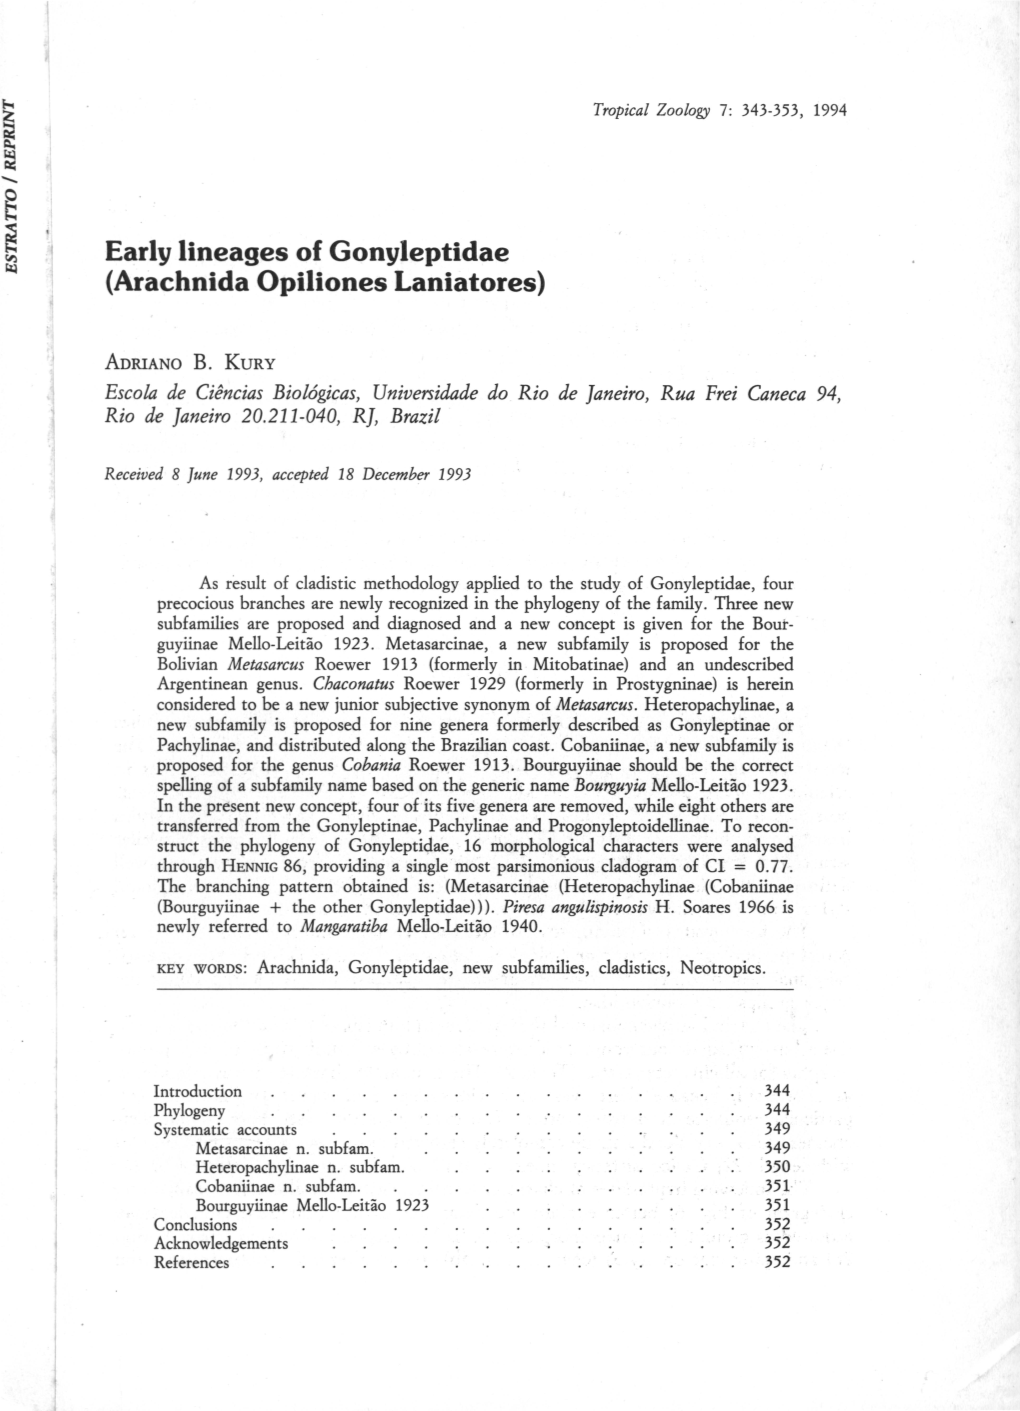 Early Lineages of Gonyleptidae (Arachnida Opiliones Laniatores)